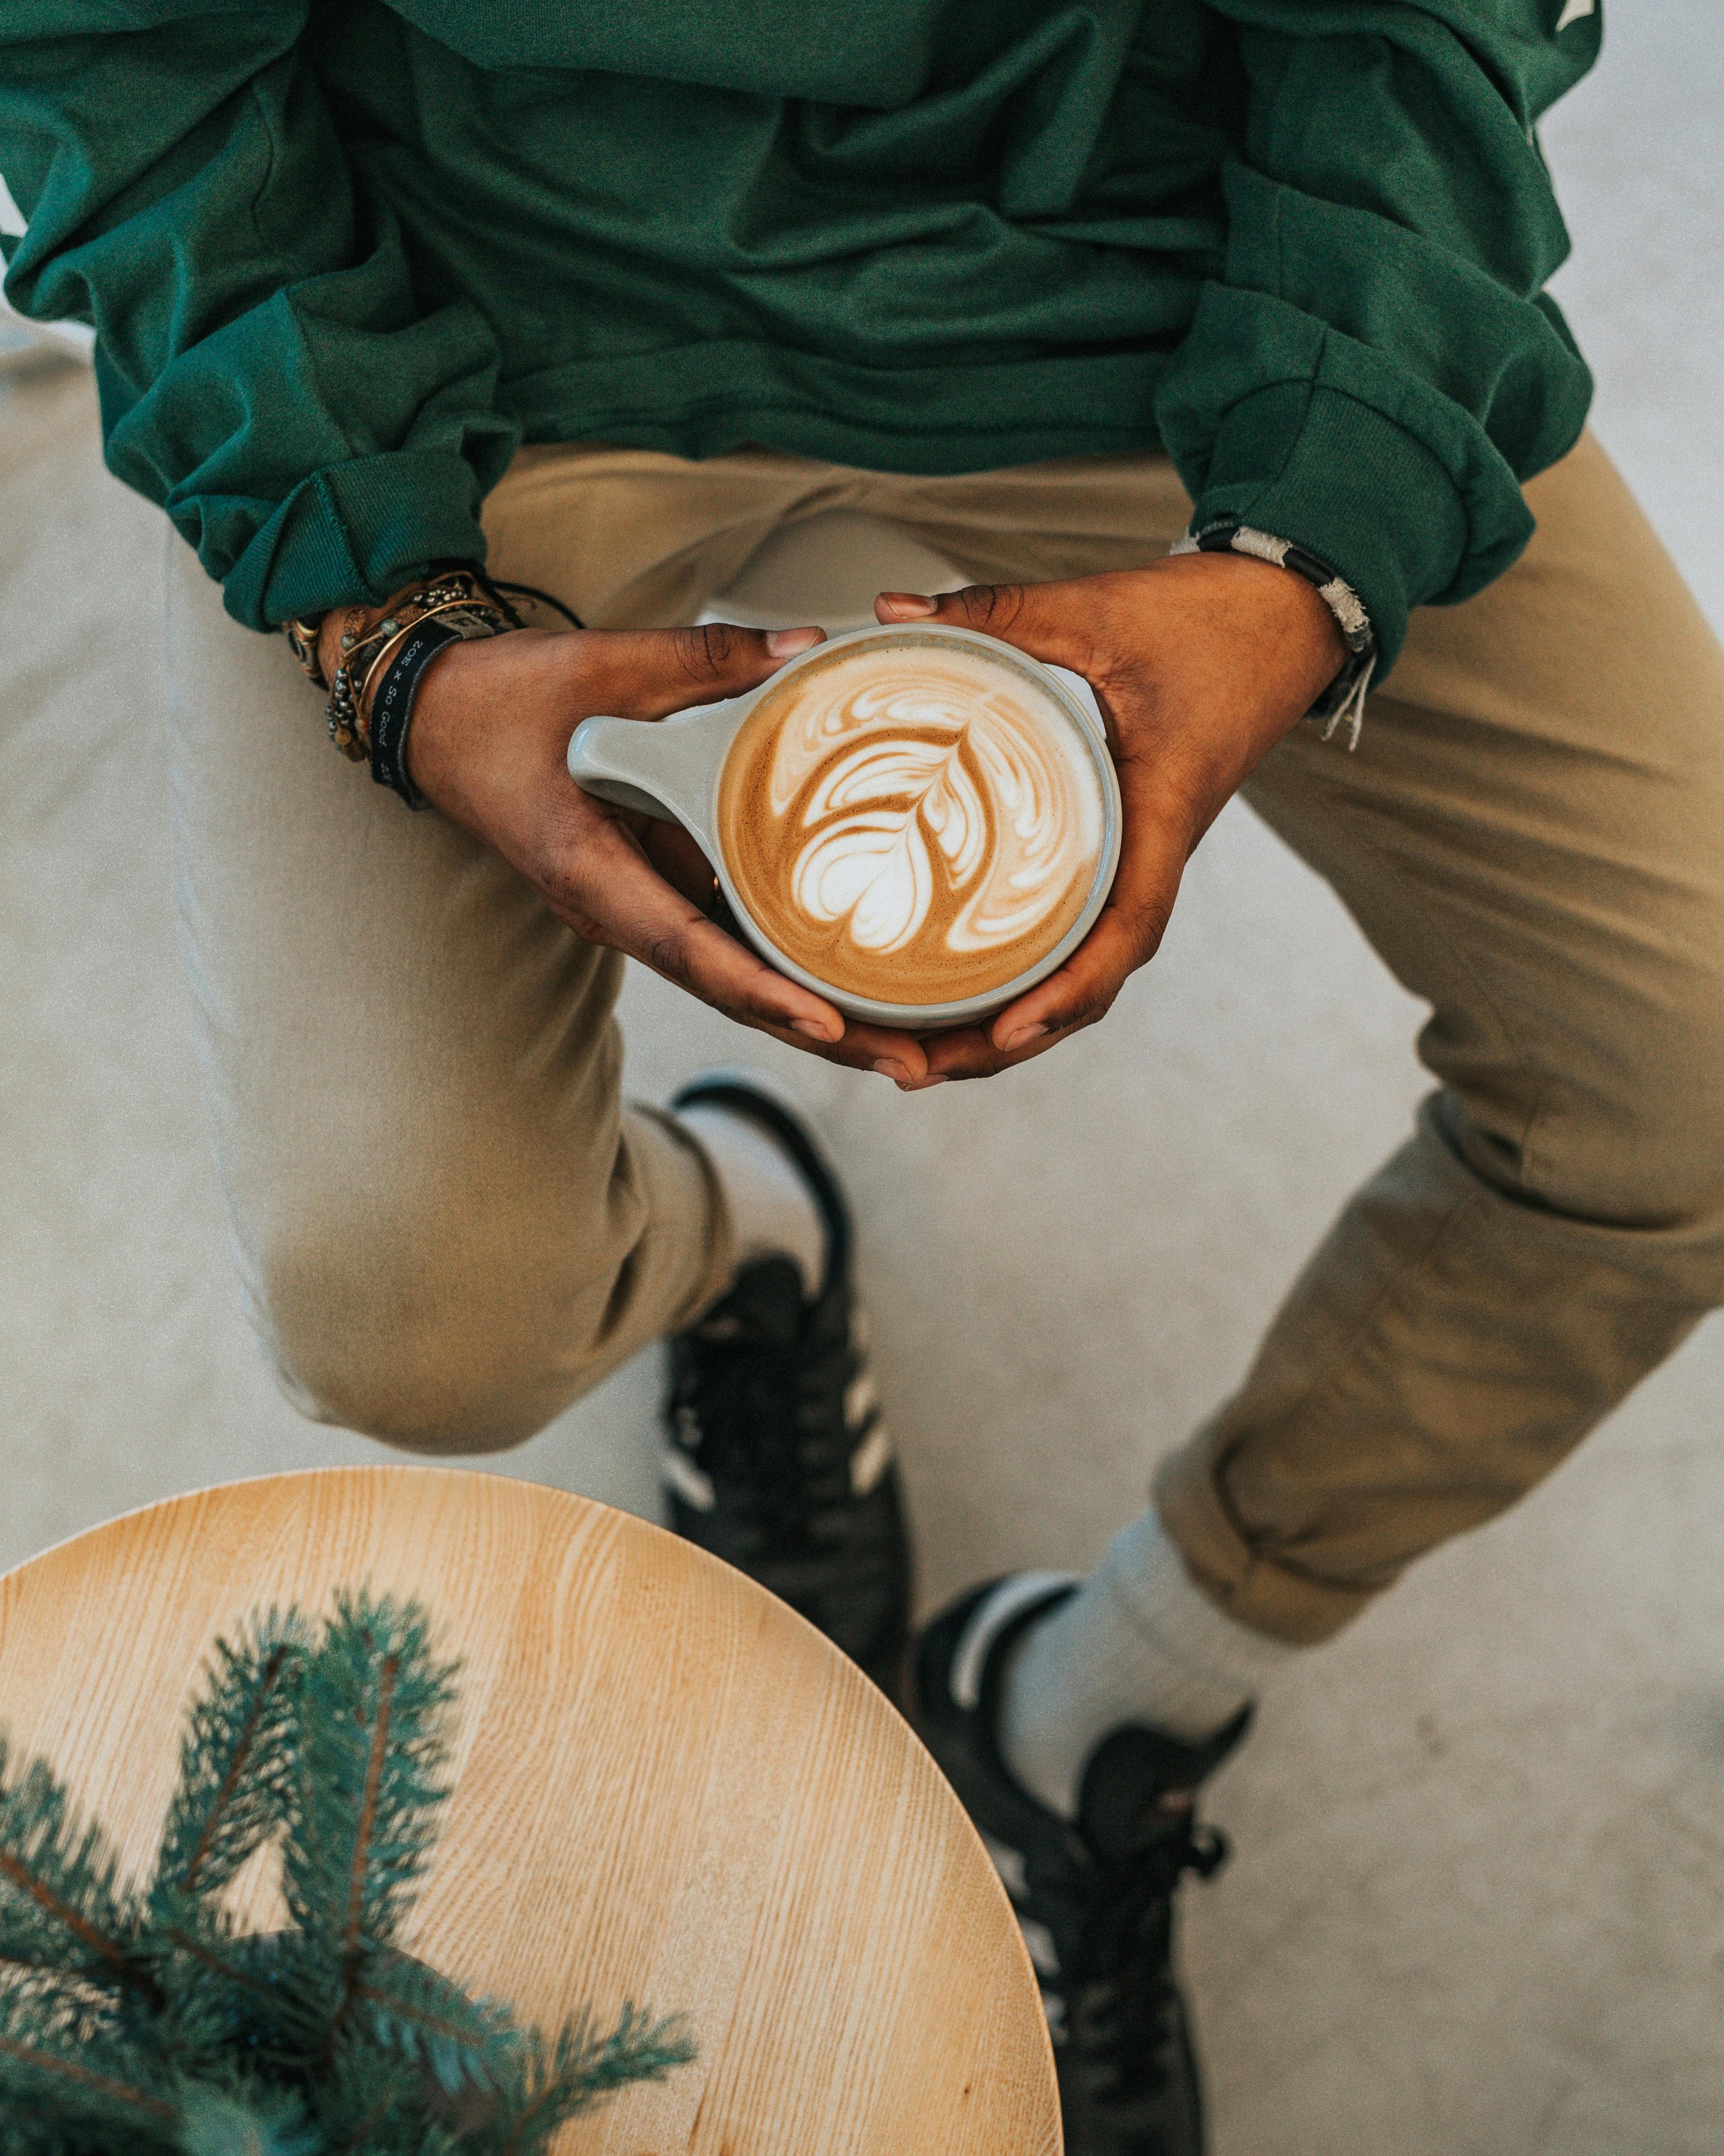 person sitting holding latte with design